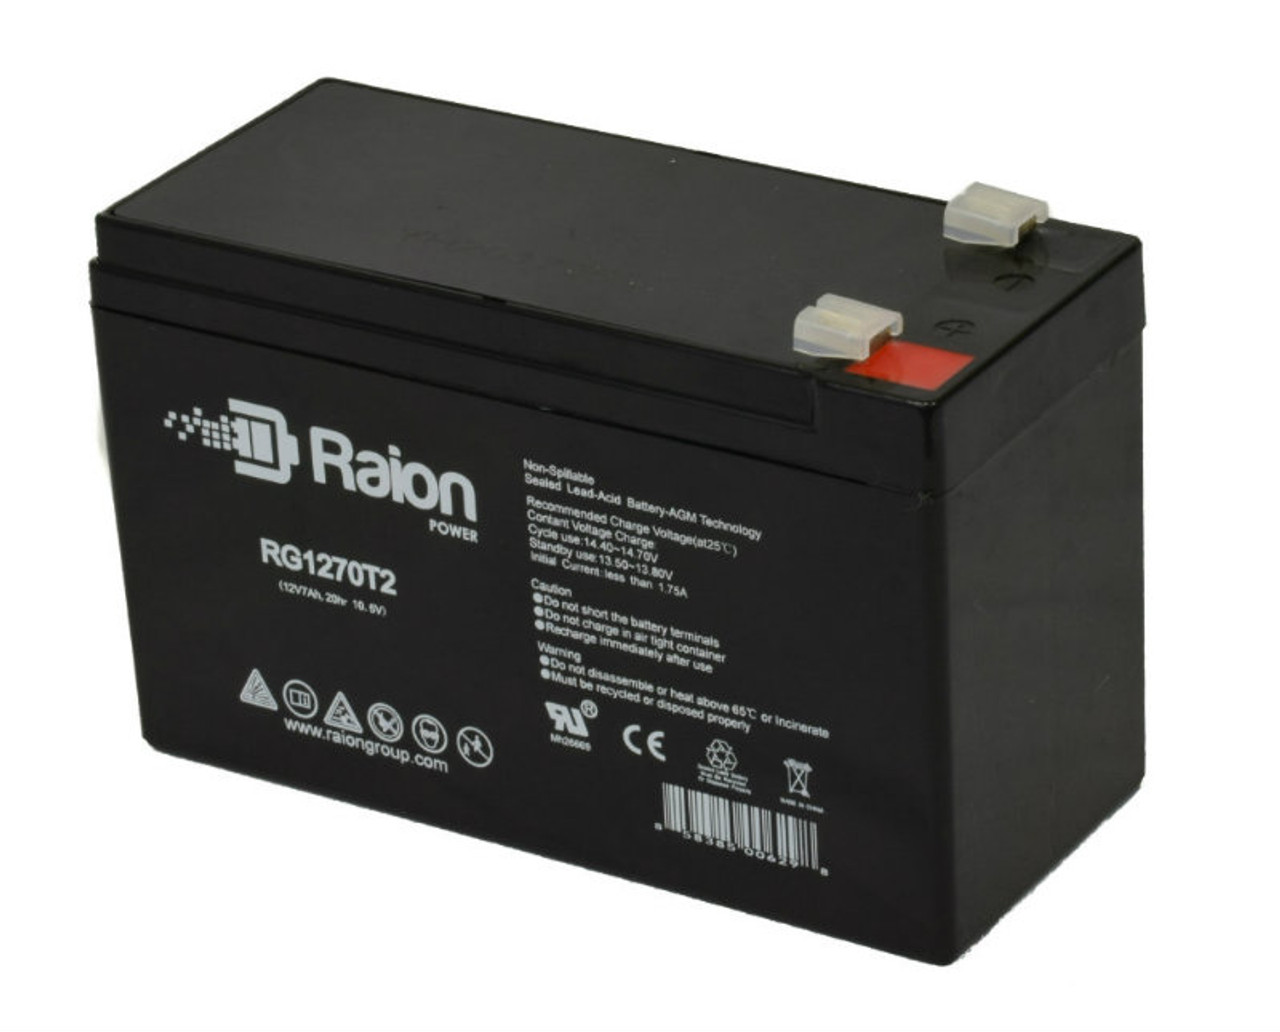 Raion Power RG1270T1 12V 7Ah Non-Spillable Replacement Battery for MHB MS7-12B F1